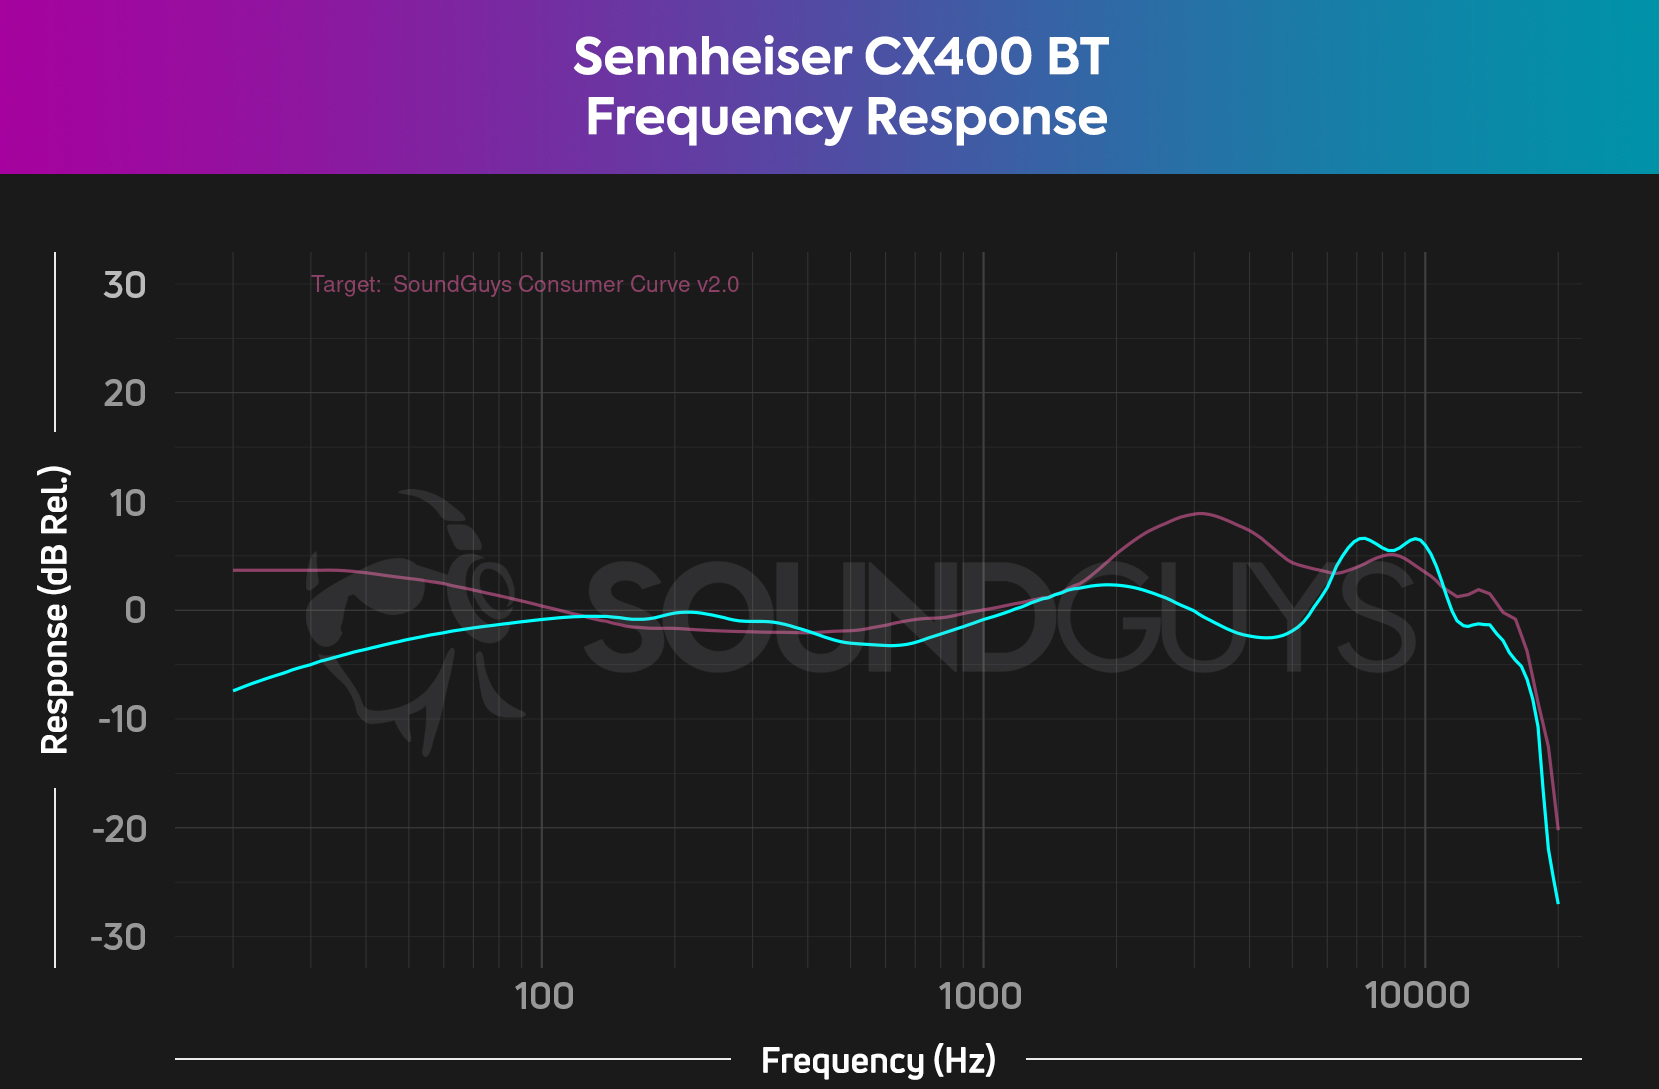 A chart depicts the Sennheiser CX400 BT (cyan) frequency response compared to the SoundGuys Consumer Curve V2.0 (pink), showing decent compliance with the target curve, though with a small under-emphasis in the highs and lack of sub-bass.